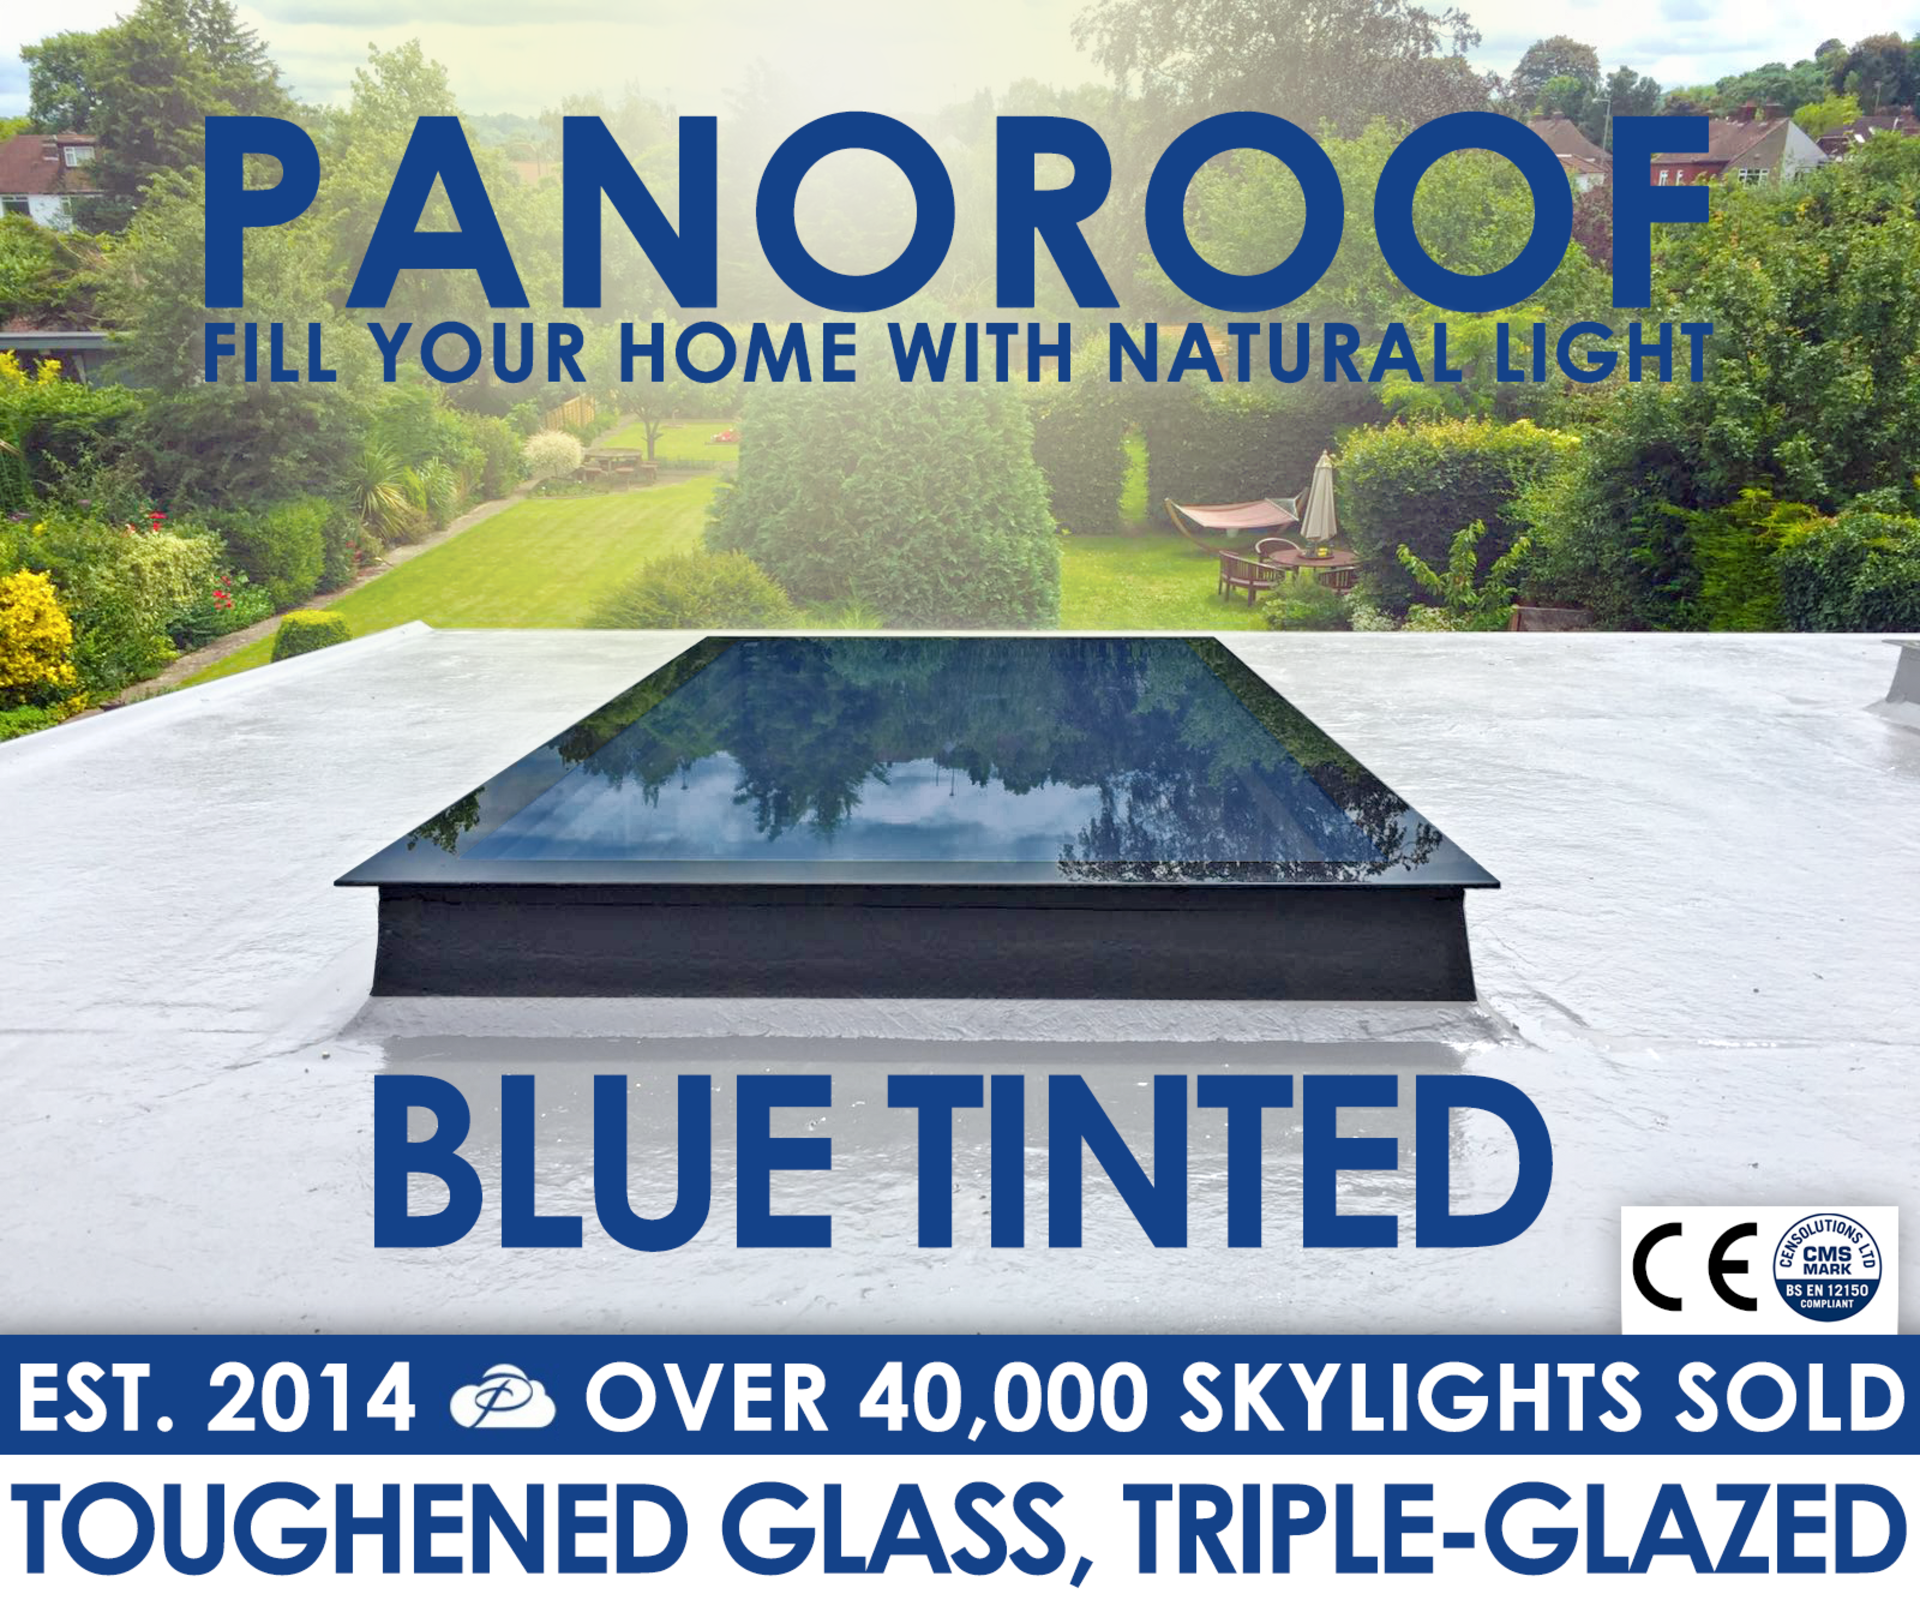 Panoroof 800x3500mm (inside Size Visable glass area) BLUE TINTED GLASS Seamless Glass Skylight